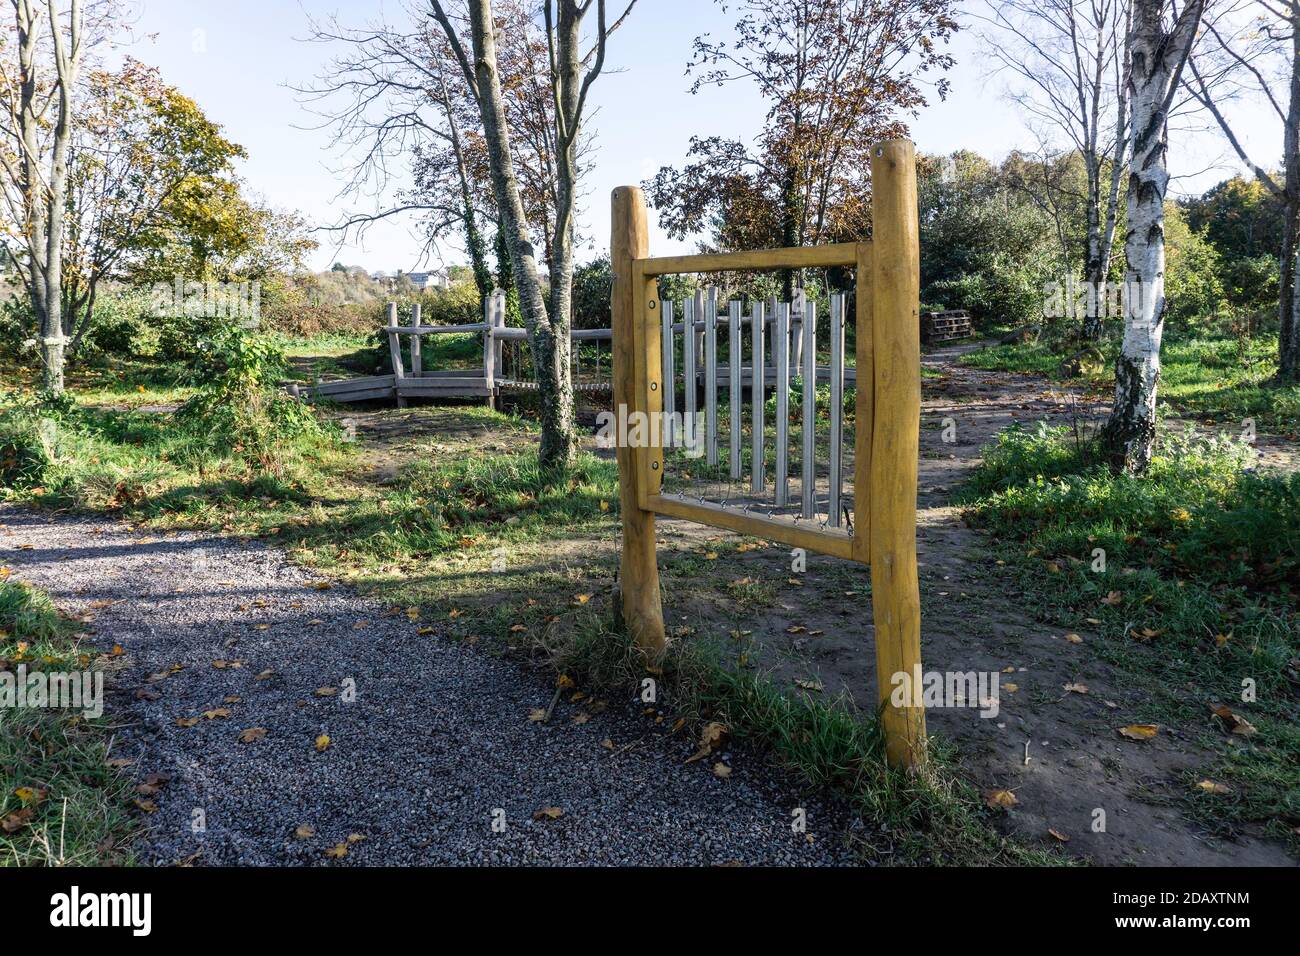 Outdoor musical chimes in Waterstown Park, in Palmerstown, Dublin, Ireland. Designed to encourage children’s musical ability, they appeal to all ages. Stock Photo